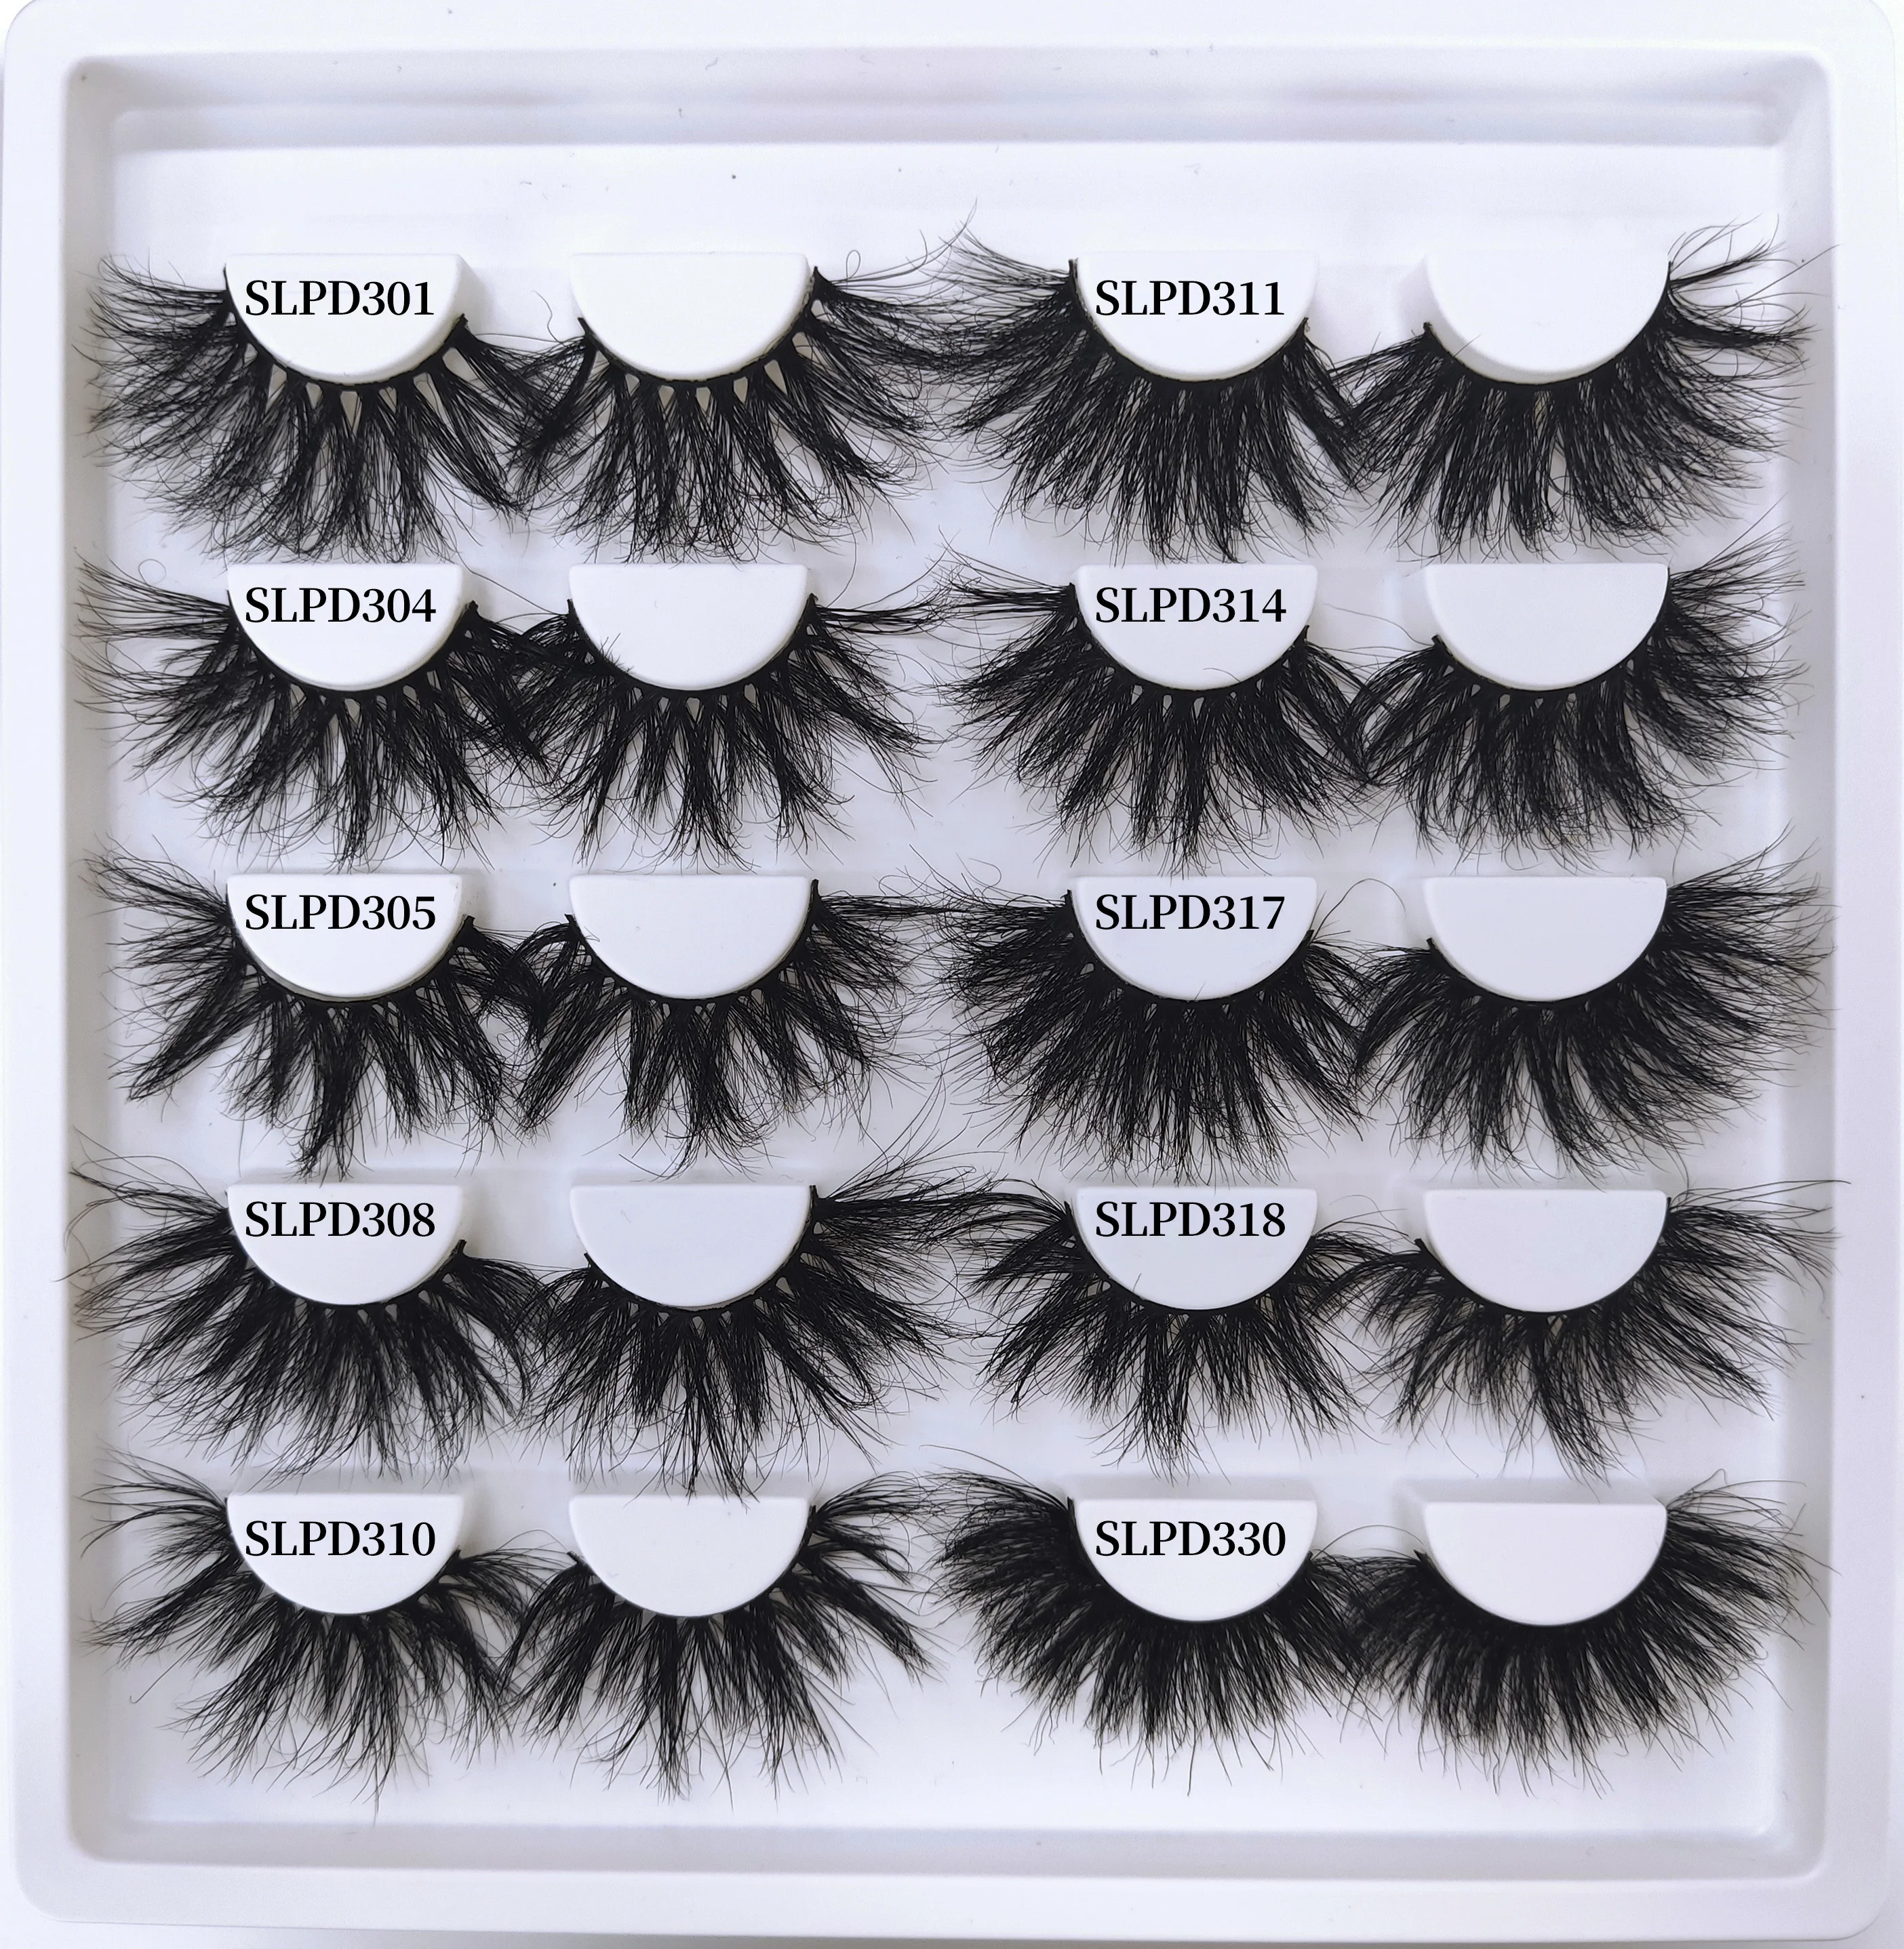 

Ready to ship Lashbeauty 30% discount 10 pairs 25MM 100% real mink lashes Diamond eyelash book, Black color